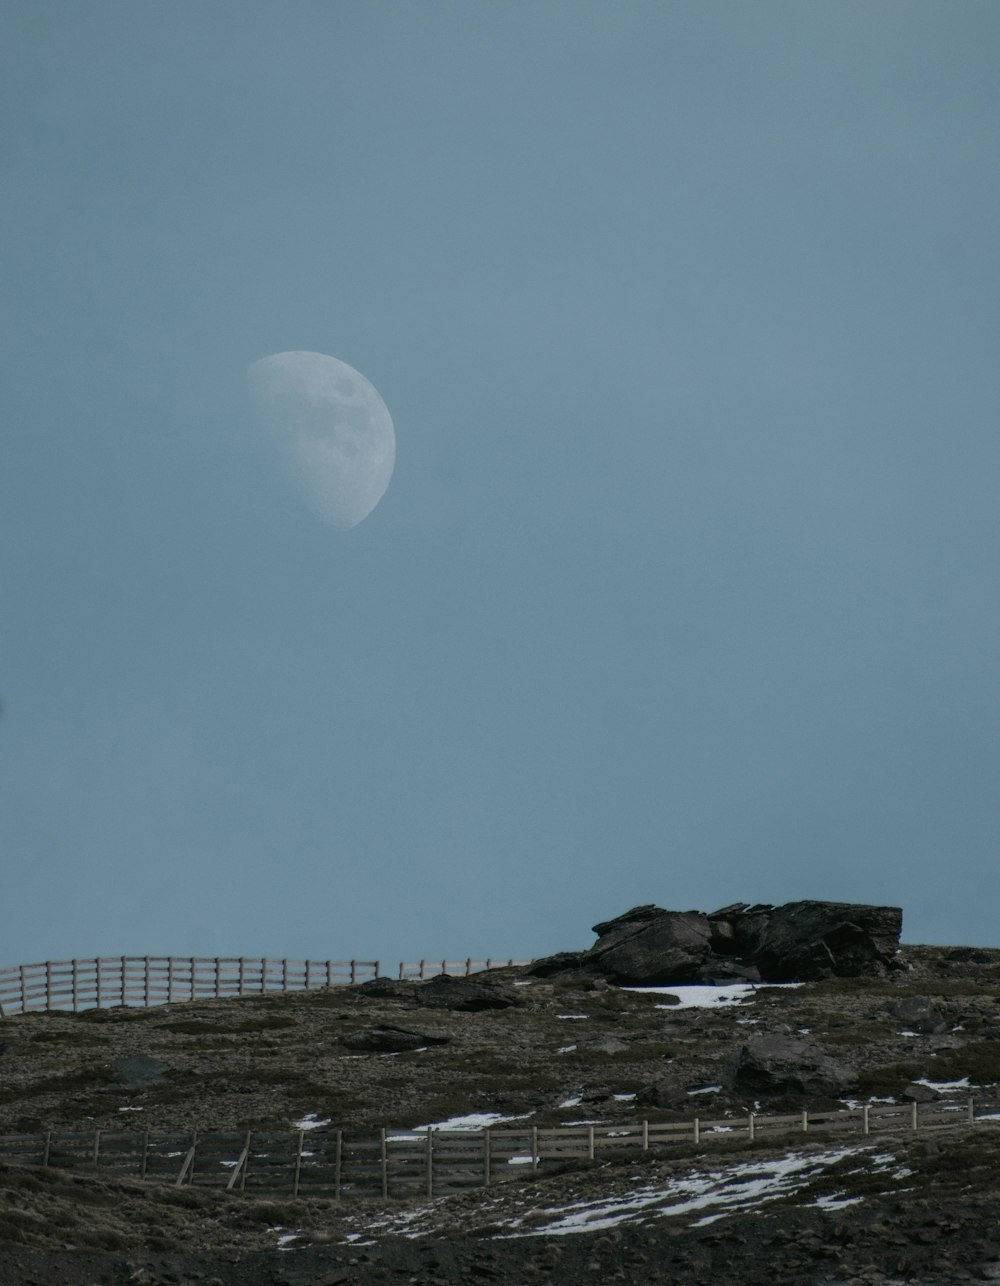 a full moon is seen over a fence on top of a hill